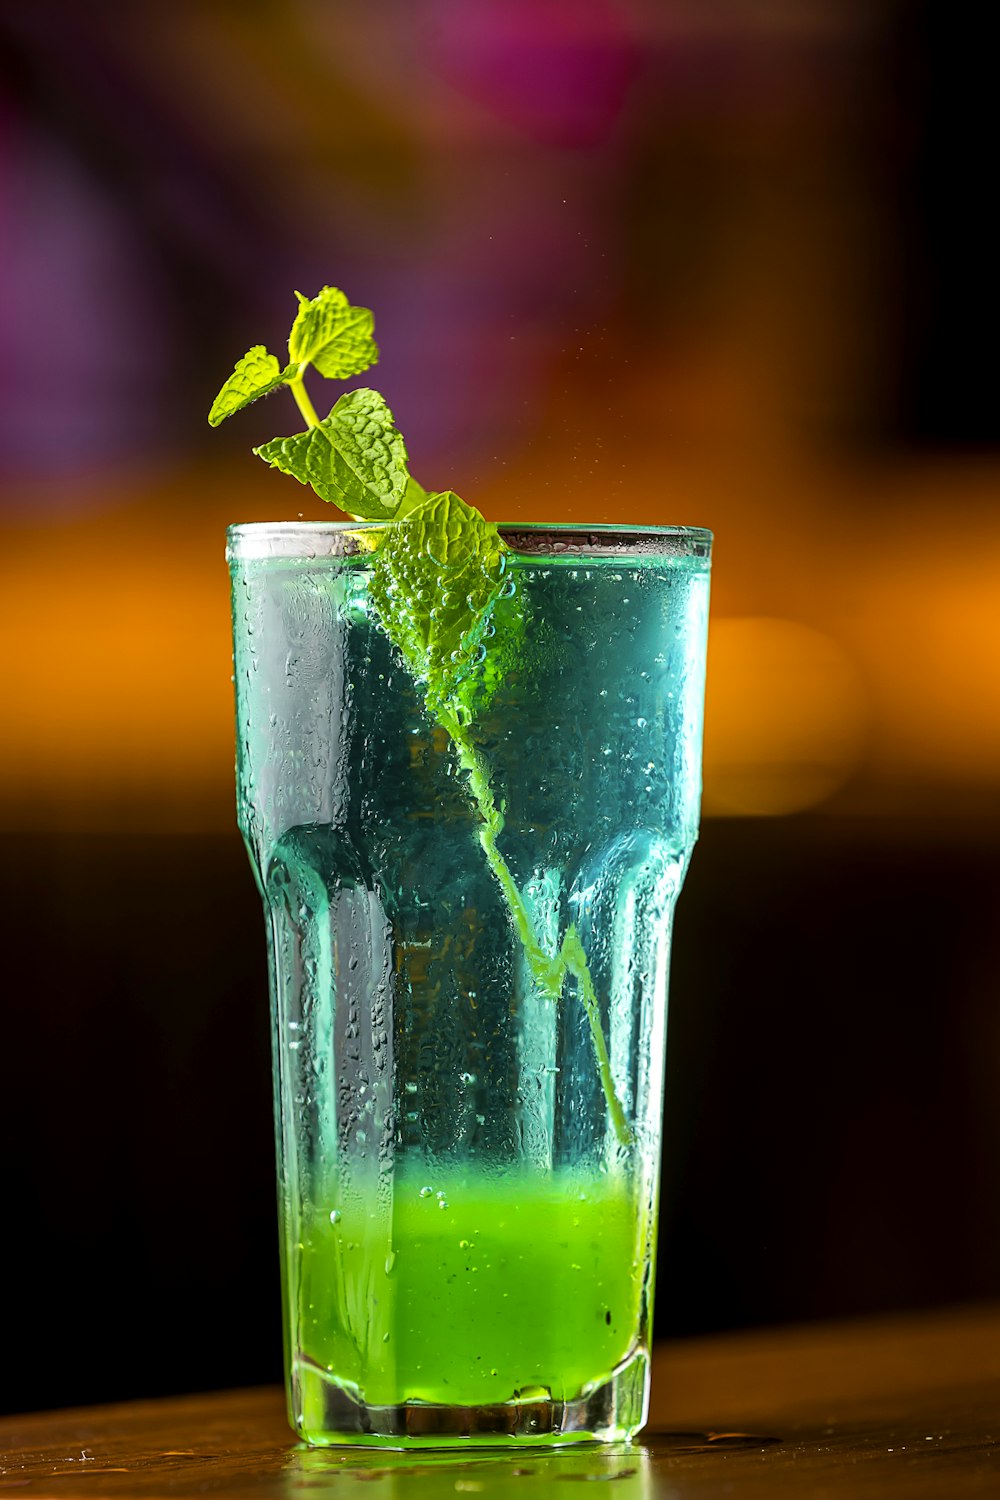 a glass filled with green liquid on top of a wooden table